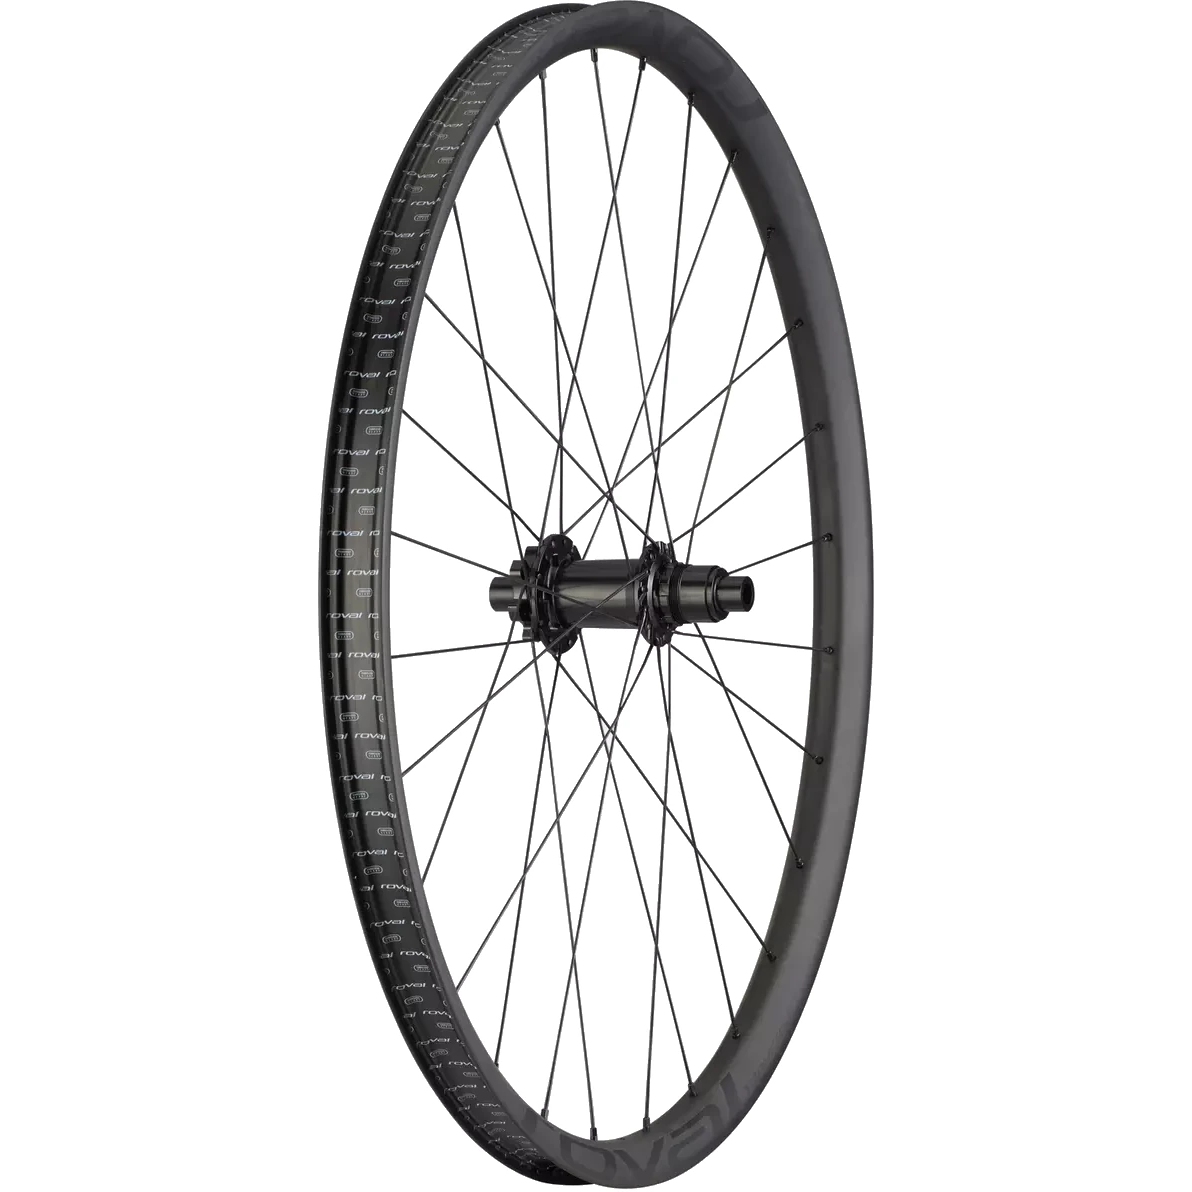 Picture of Specialized Roval Traverse SL 29 Inch Carbon Rear Wheel - 6-Bolt - SRAM XD - 12x148mm - Carbon/Black